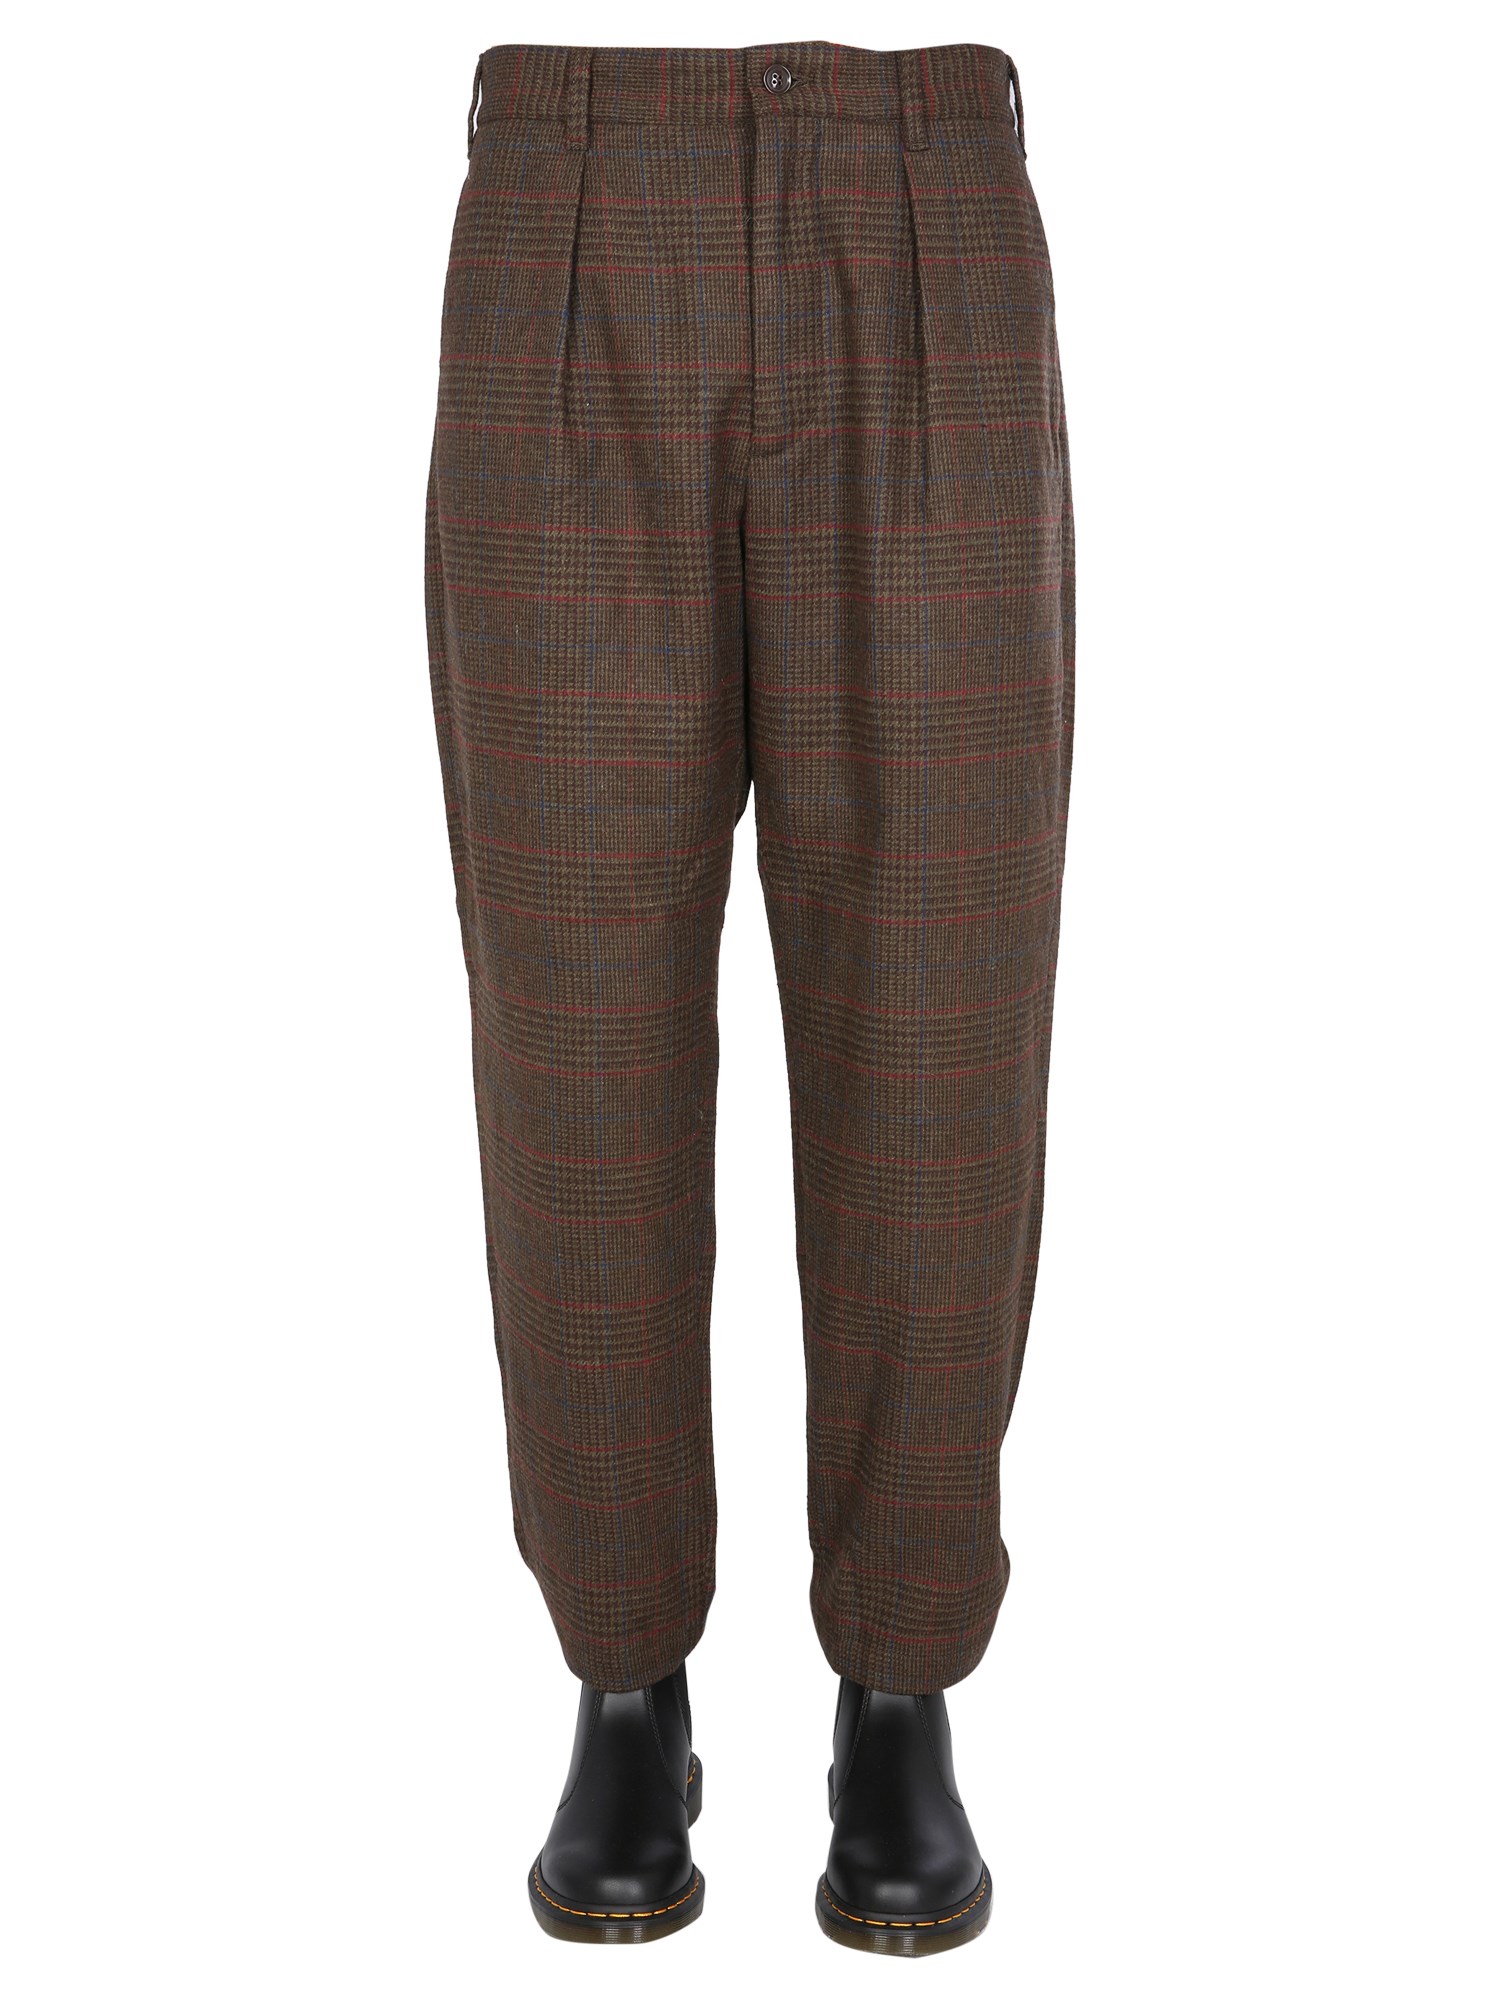 engineered garments "carlyle" trousers